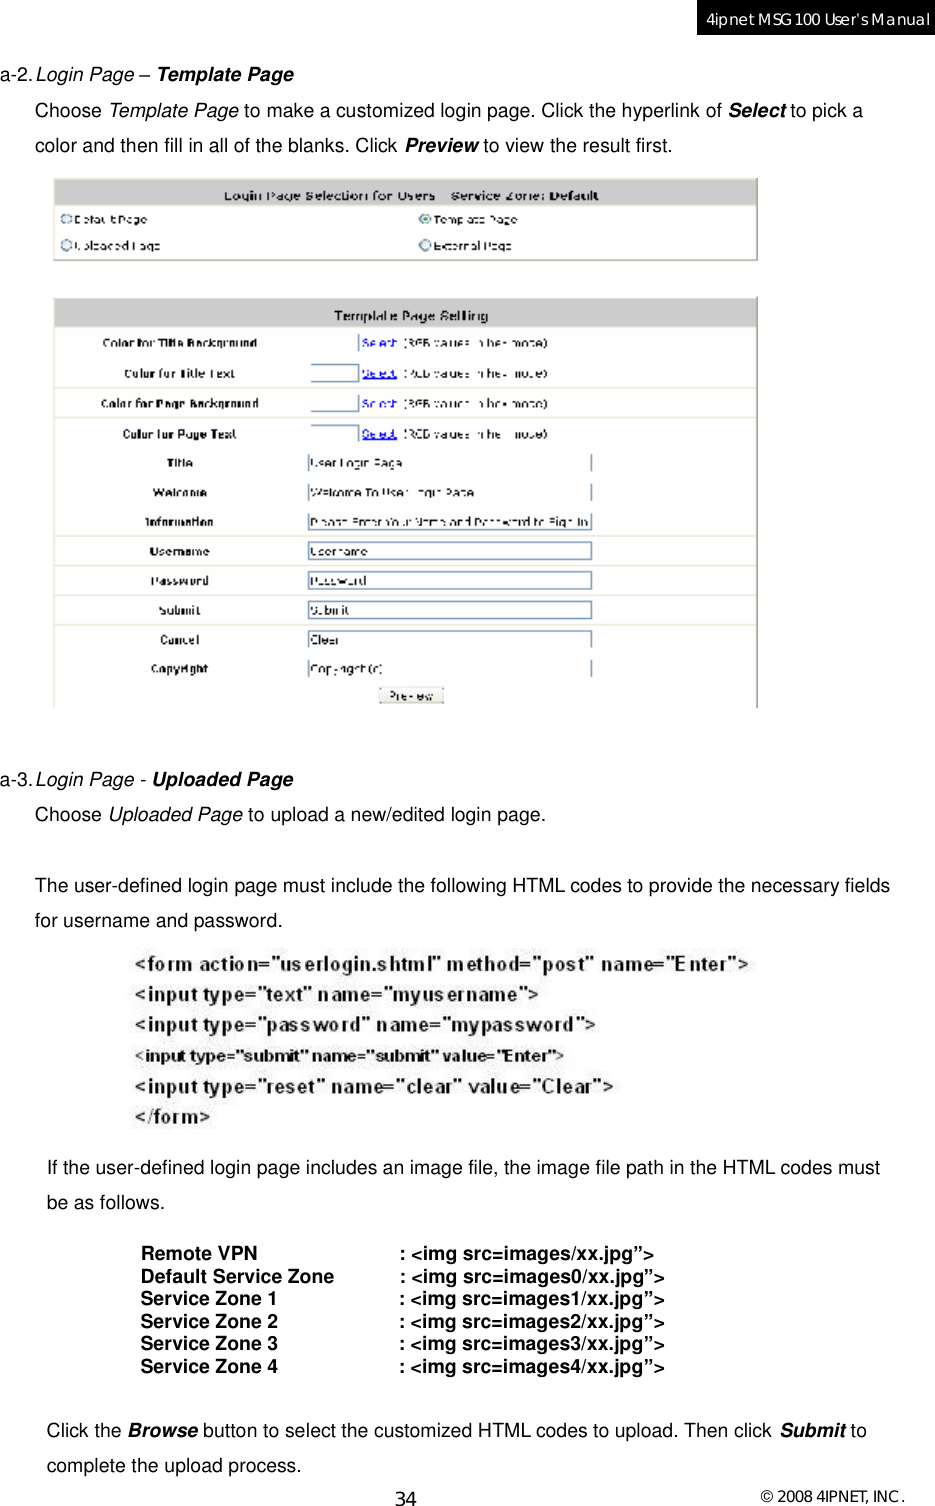  © 2008 4IPNET, INC. 34 4ipnet MSG100 User’s Manual  a-2. Login Page – Template Page Choose Template Page to make a customized login page. Click the hyperlink of Select to pick a color and then fill in all of the blanks. Click Preview to view the result first.   a-3. Login Page - Uploaded Page Choose Uploaded Page to upload a new/edited login page.  The user-defined login page must include the following HTML codes to provide the necessary fields for username and password.   If the user-defined login page includes an image file, the image file path in the HTML codes must be as follows.  Remote VPN           : &lt;img src=images/xx.jpg”&gt; Default Service Zone : &lt;img src=images0/xx.jpg”&gt; Service Zone 1       : &lt;img src=images1/xx.jpg”&gt; Service Zone 2       : &lt;img src=images2/xx.jpg”&gt; Service Zone 3       : &lt;img src=images3/xx.jpg”&gt; Service Zone 4       : &lt;img src=images4/xx.jpg”&gt;  Click the Browse button to select the customized HTML codes to upload. Then click Submit to complete the upload process. 